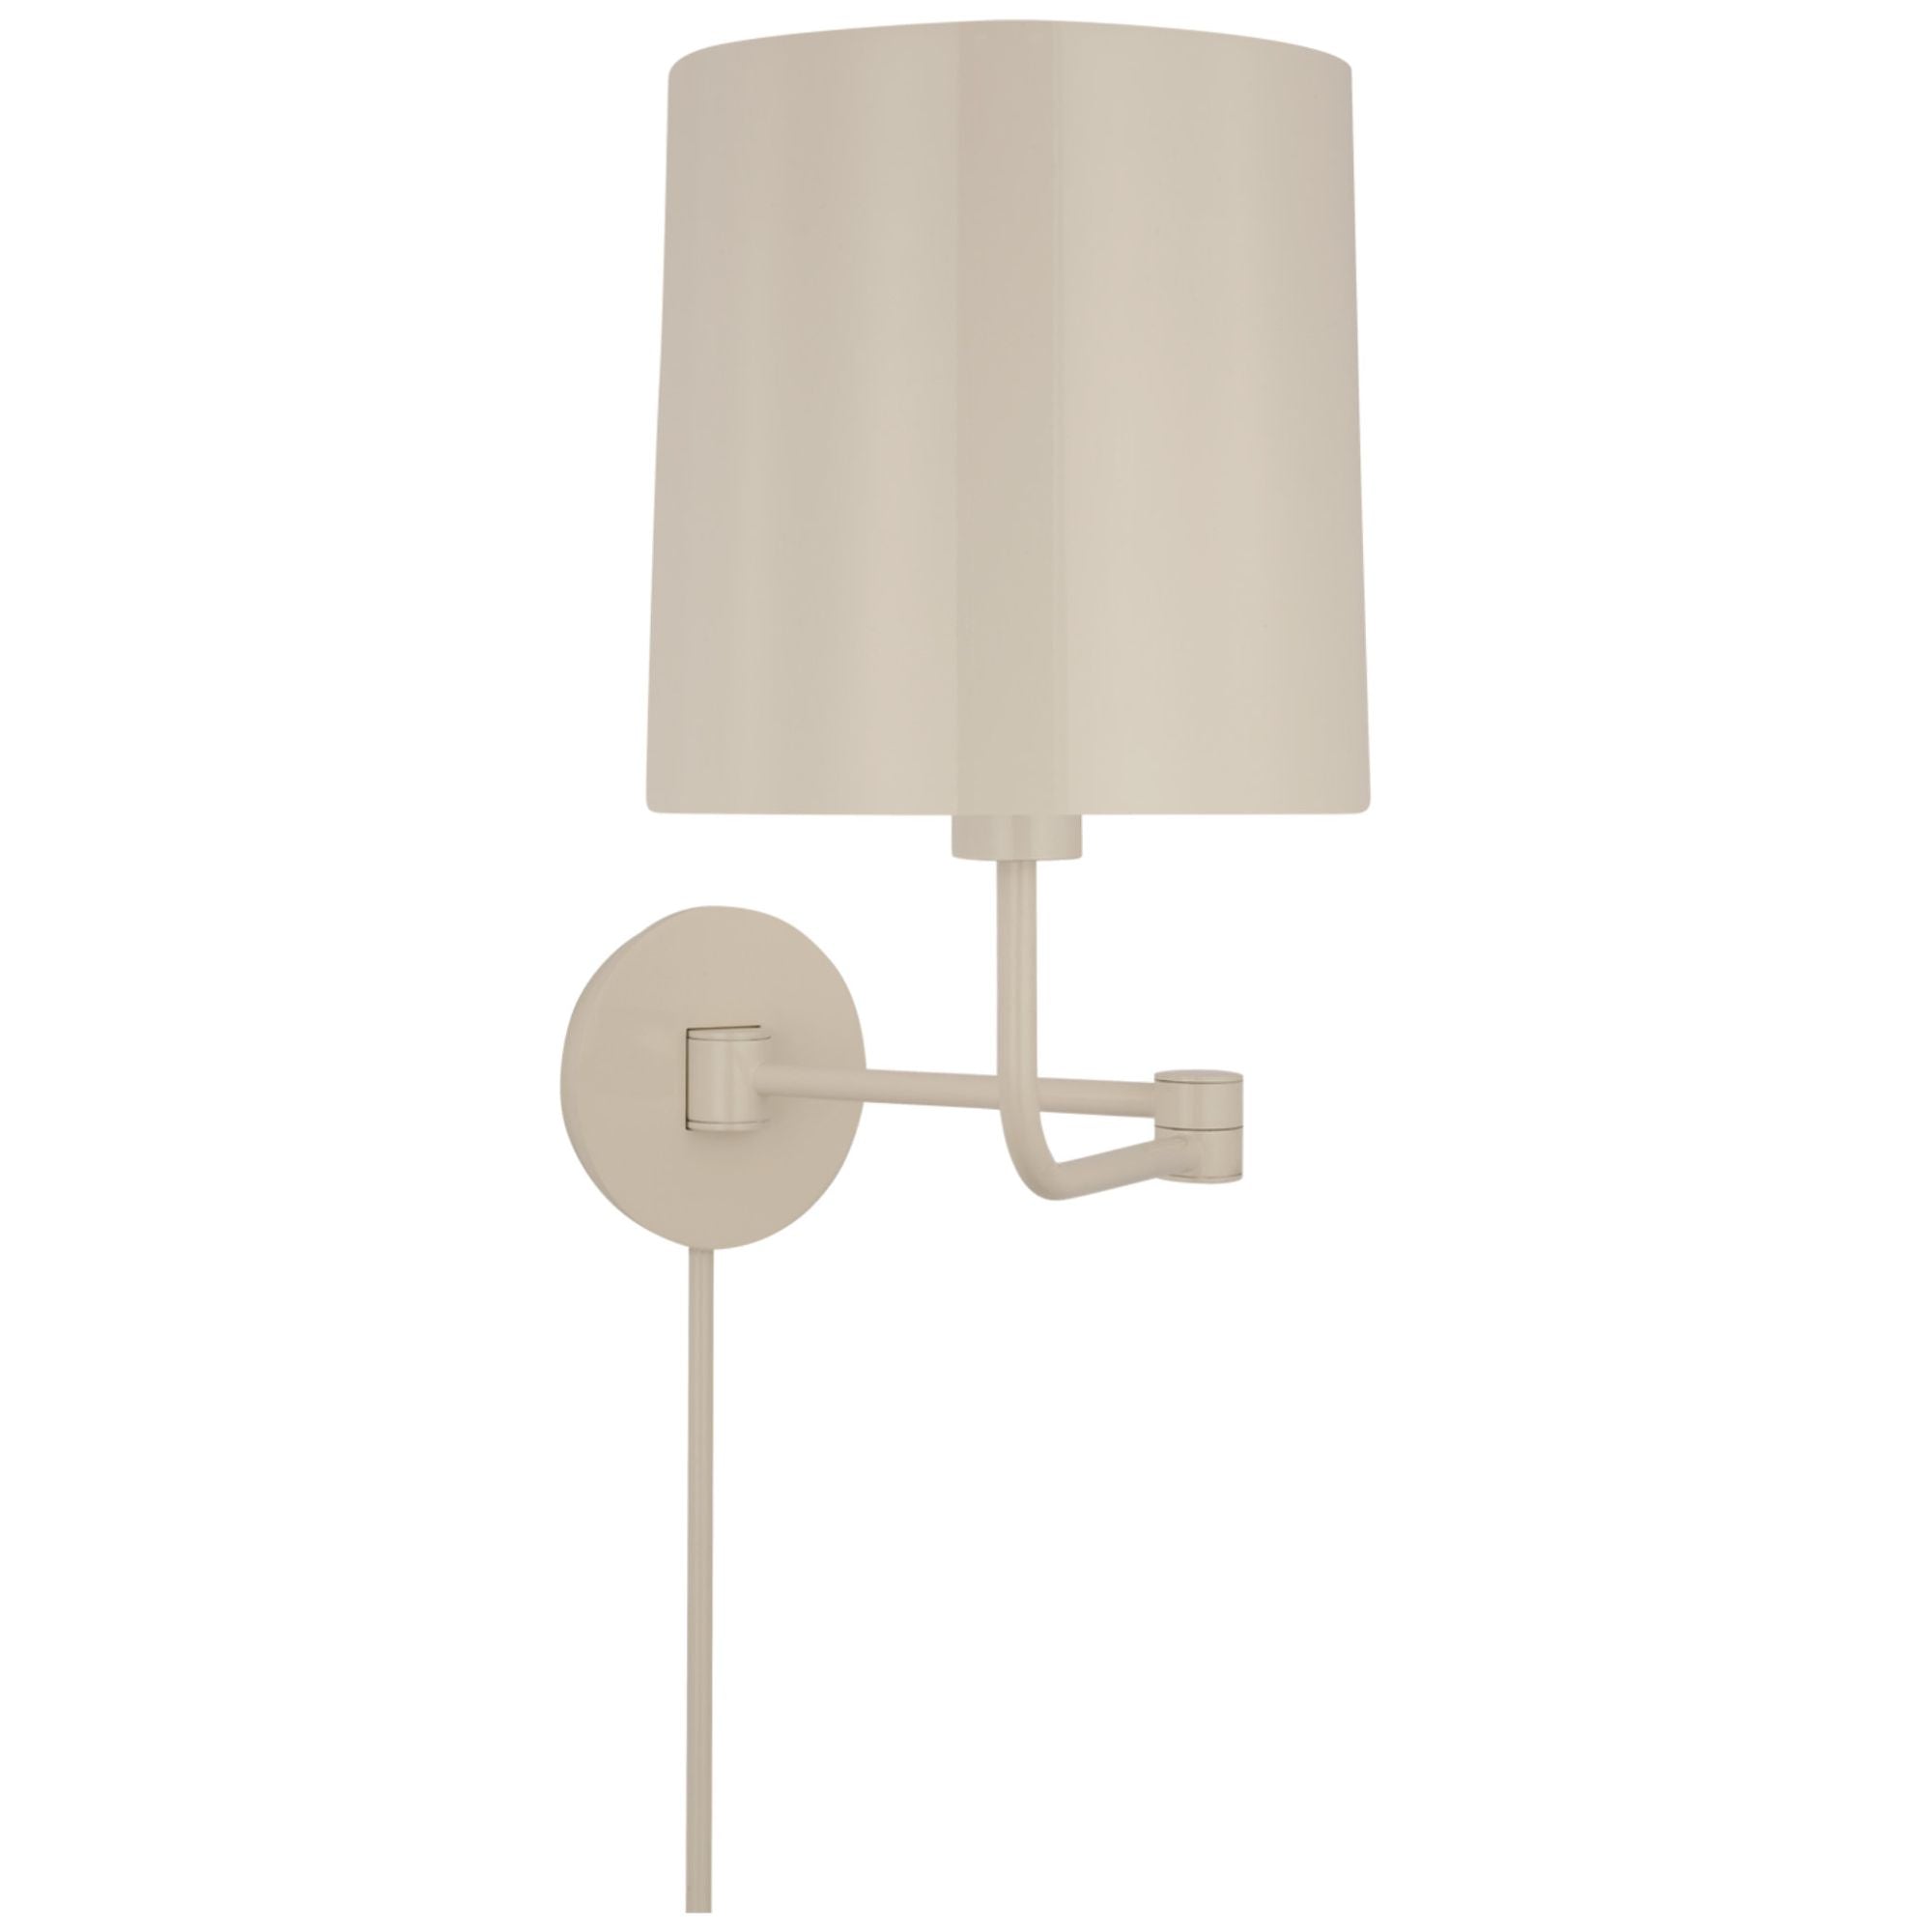 Barbara Barry Go Lightly Swing Arm Wall Light in China White with China White Shade